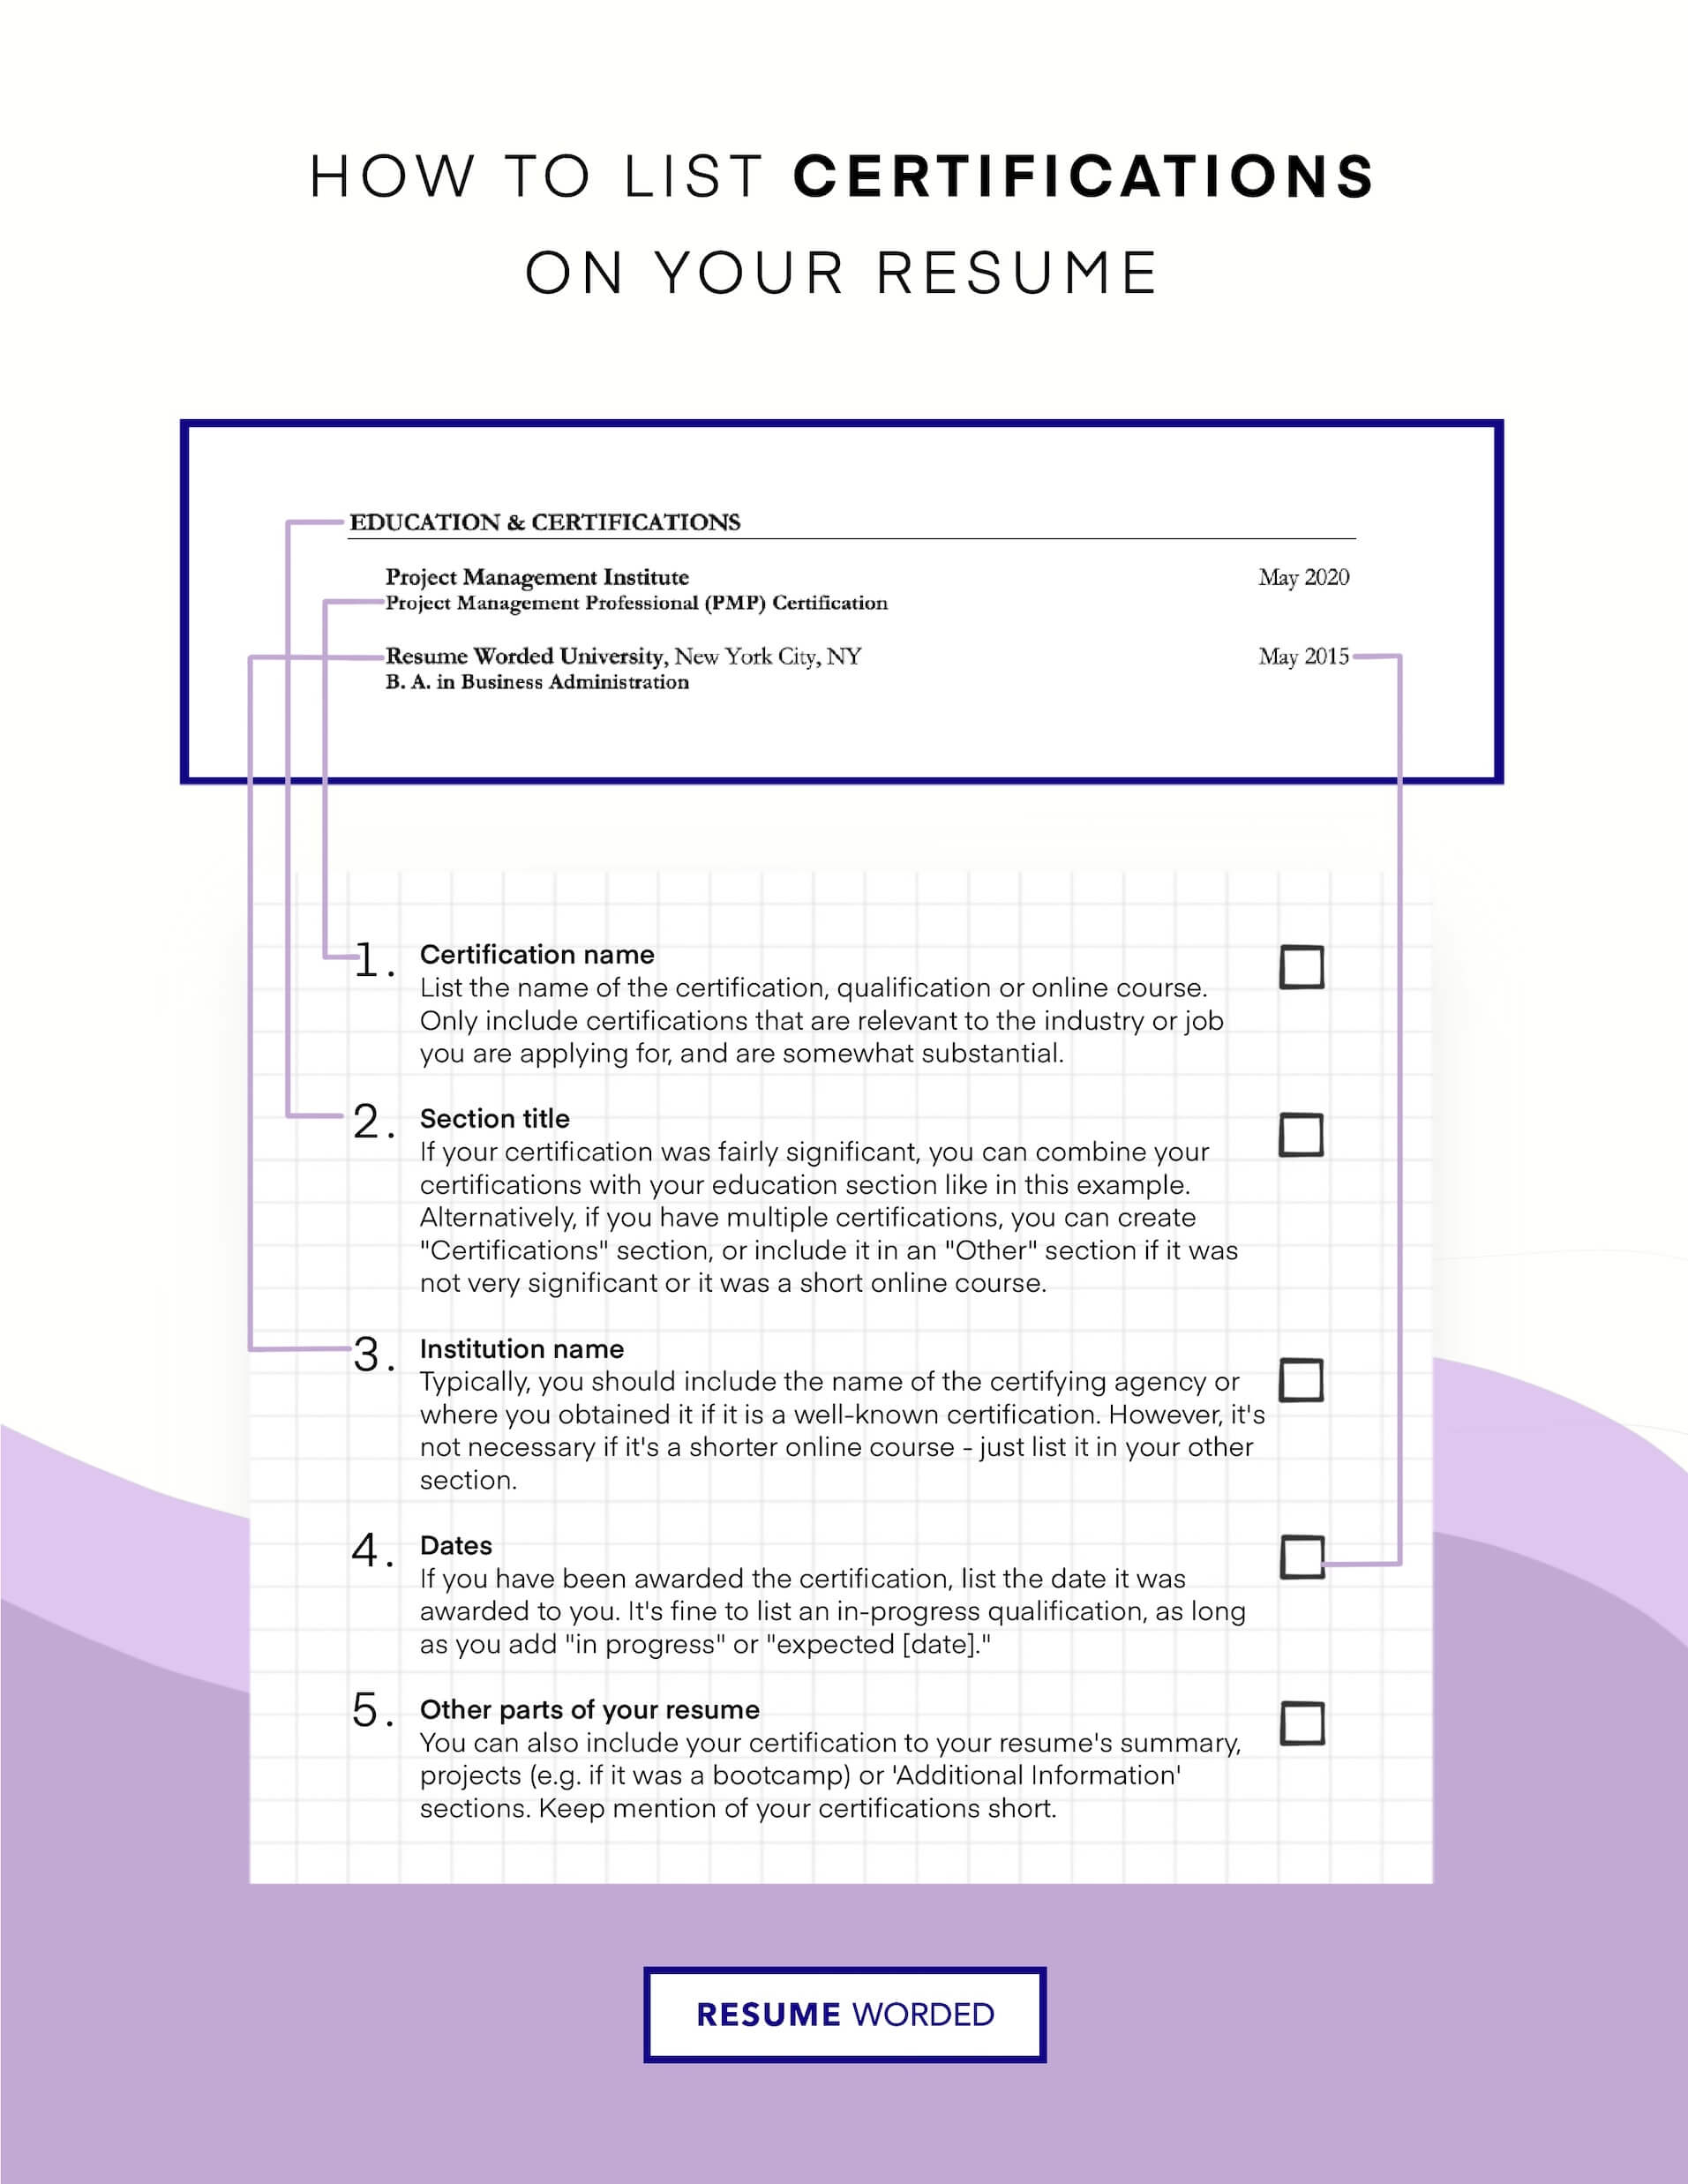 Showcase your qualifications and certifications - Health and Safety Officer Resume